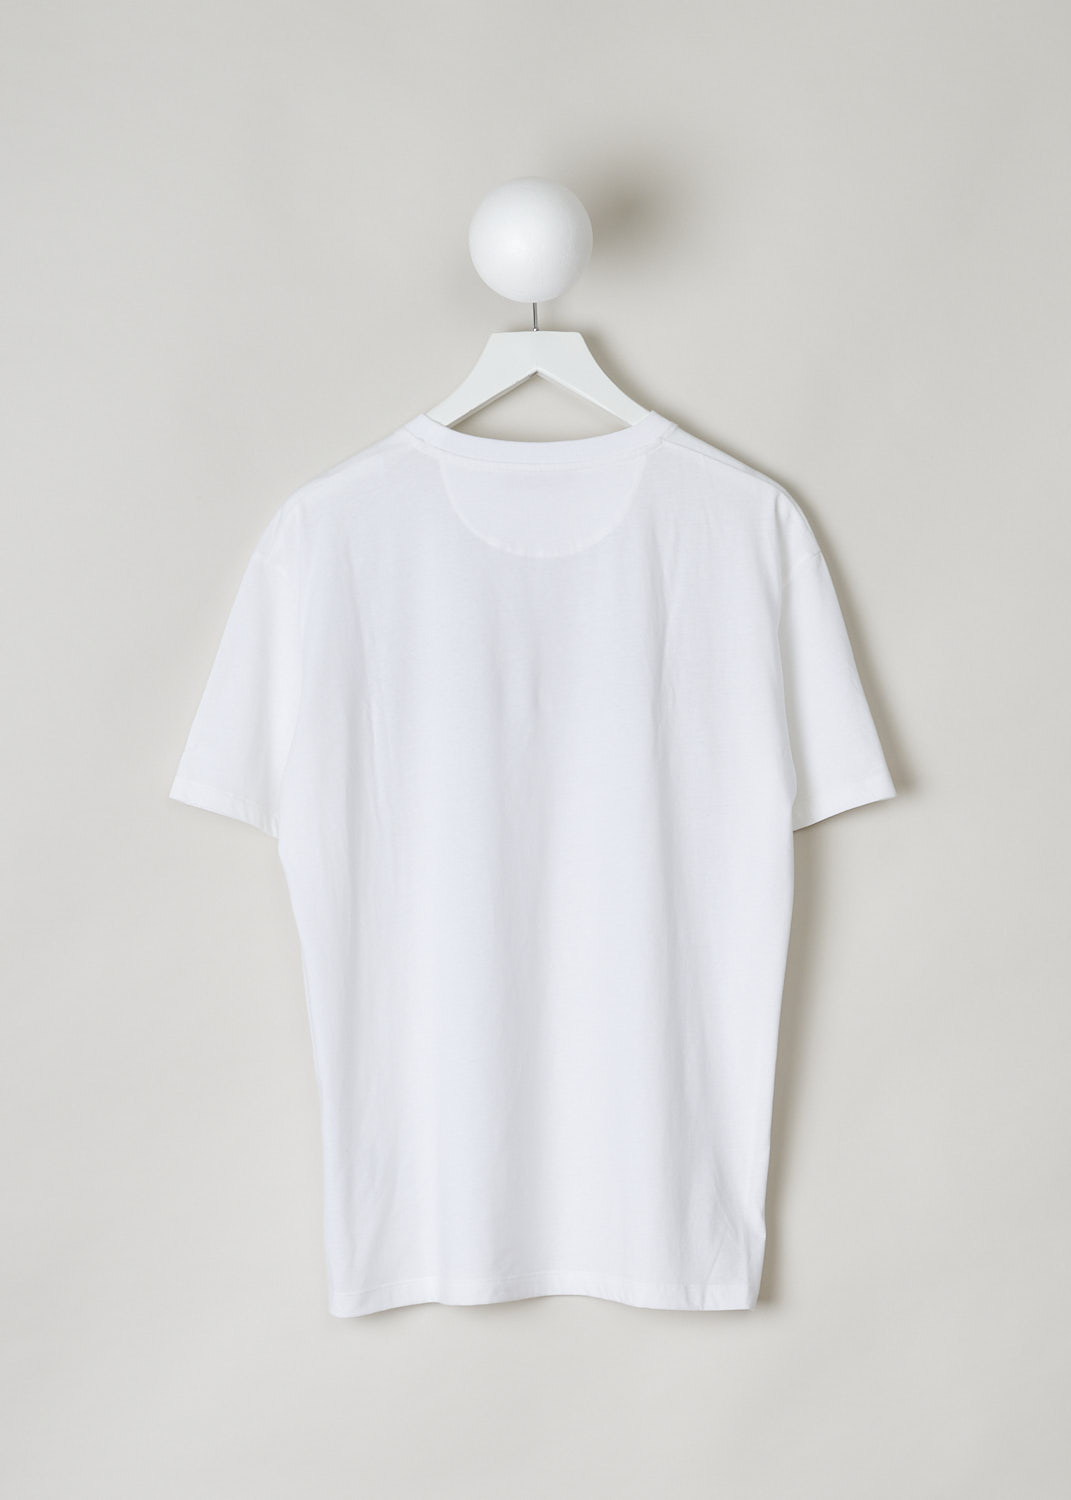 VALENTINO, WHITE T-SHIRT WITH SEQUIN LETTERING, 1B3MG18W7DN_0BO, White, Back, This white T-shirt has the brand's lettering in ombre sequins across the chest. The shirt has a round neckline and short sleeves. 
